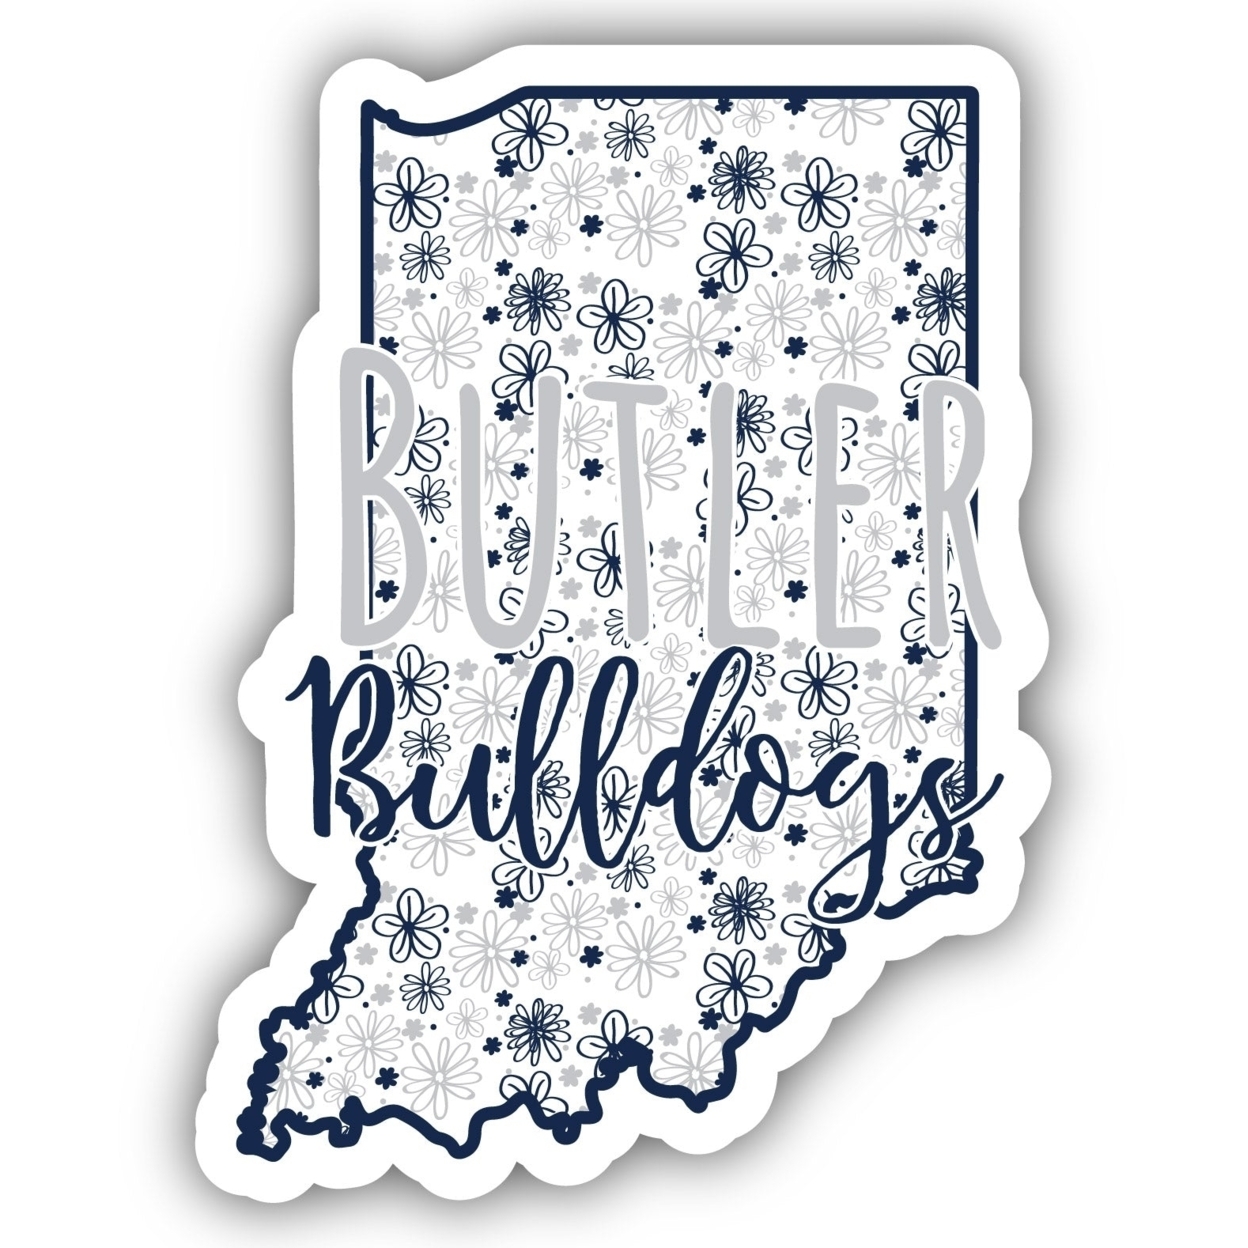 Butler Bulldogs Floral State Die Cut Decal 2-Inch